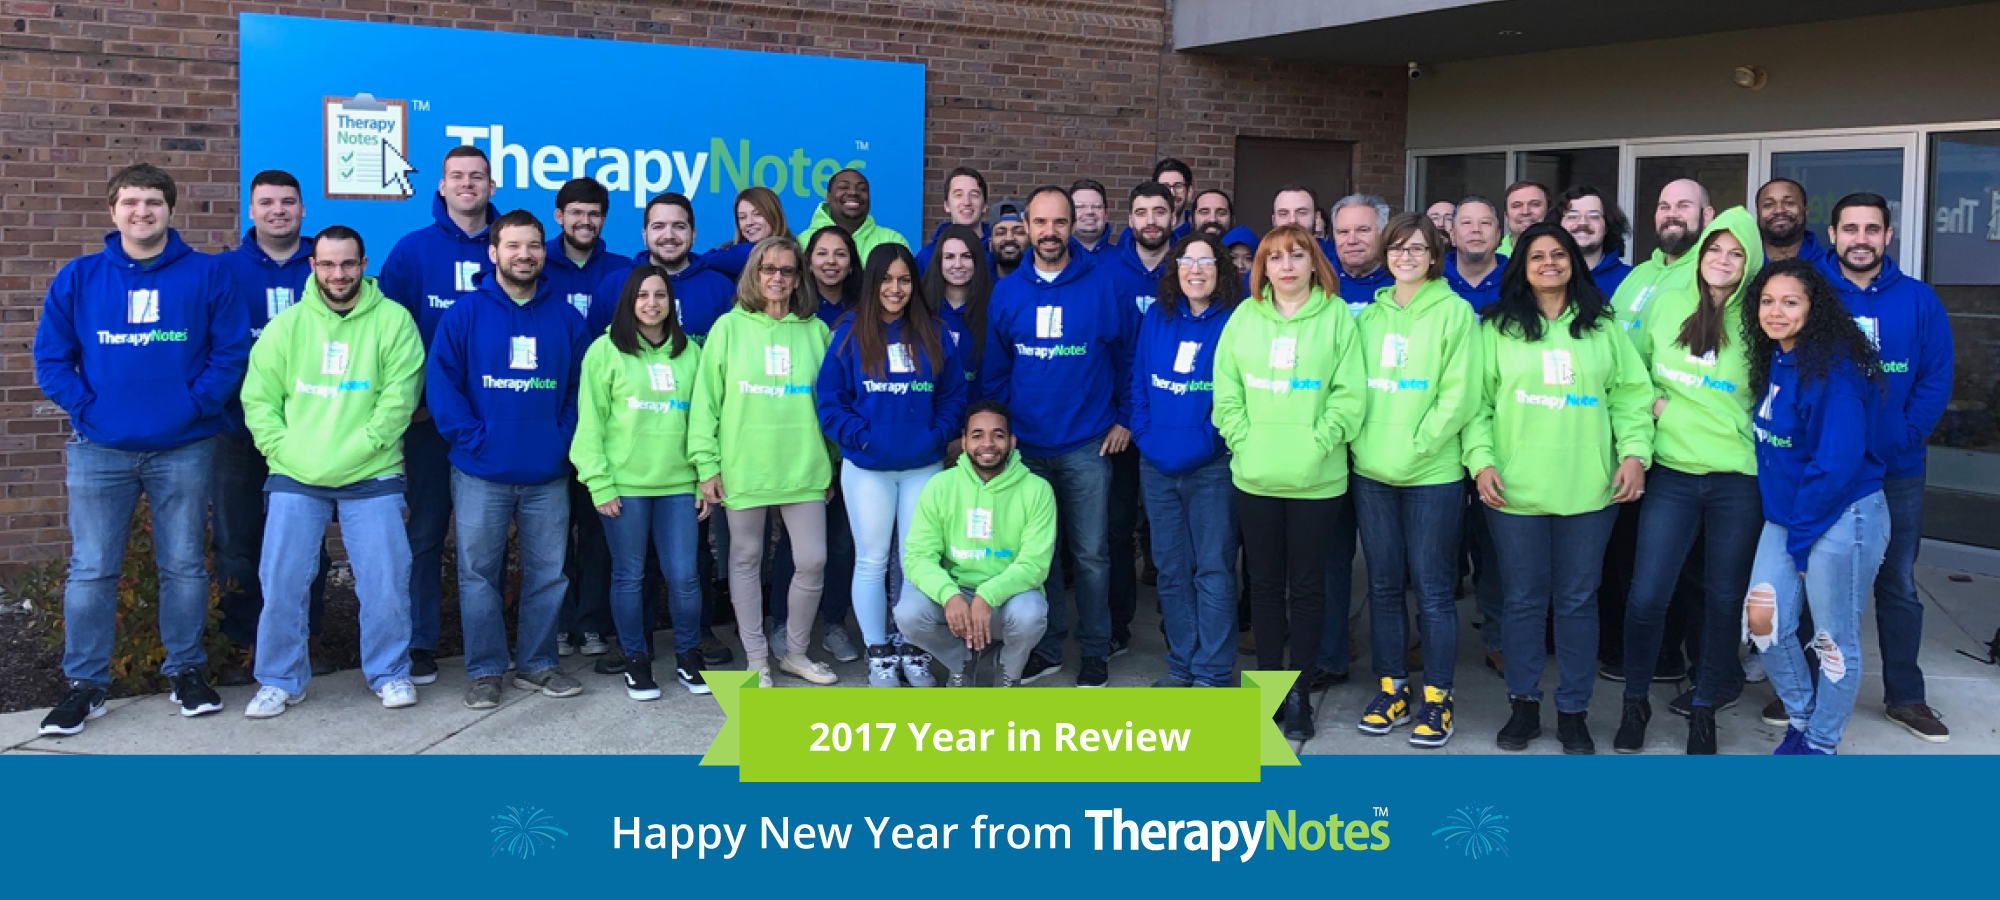 TherapyNotes team